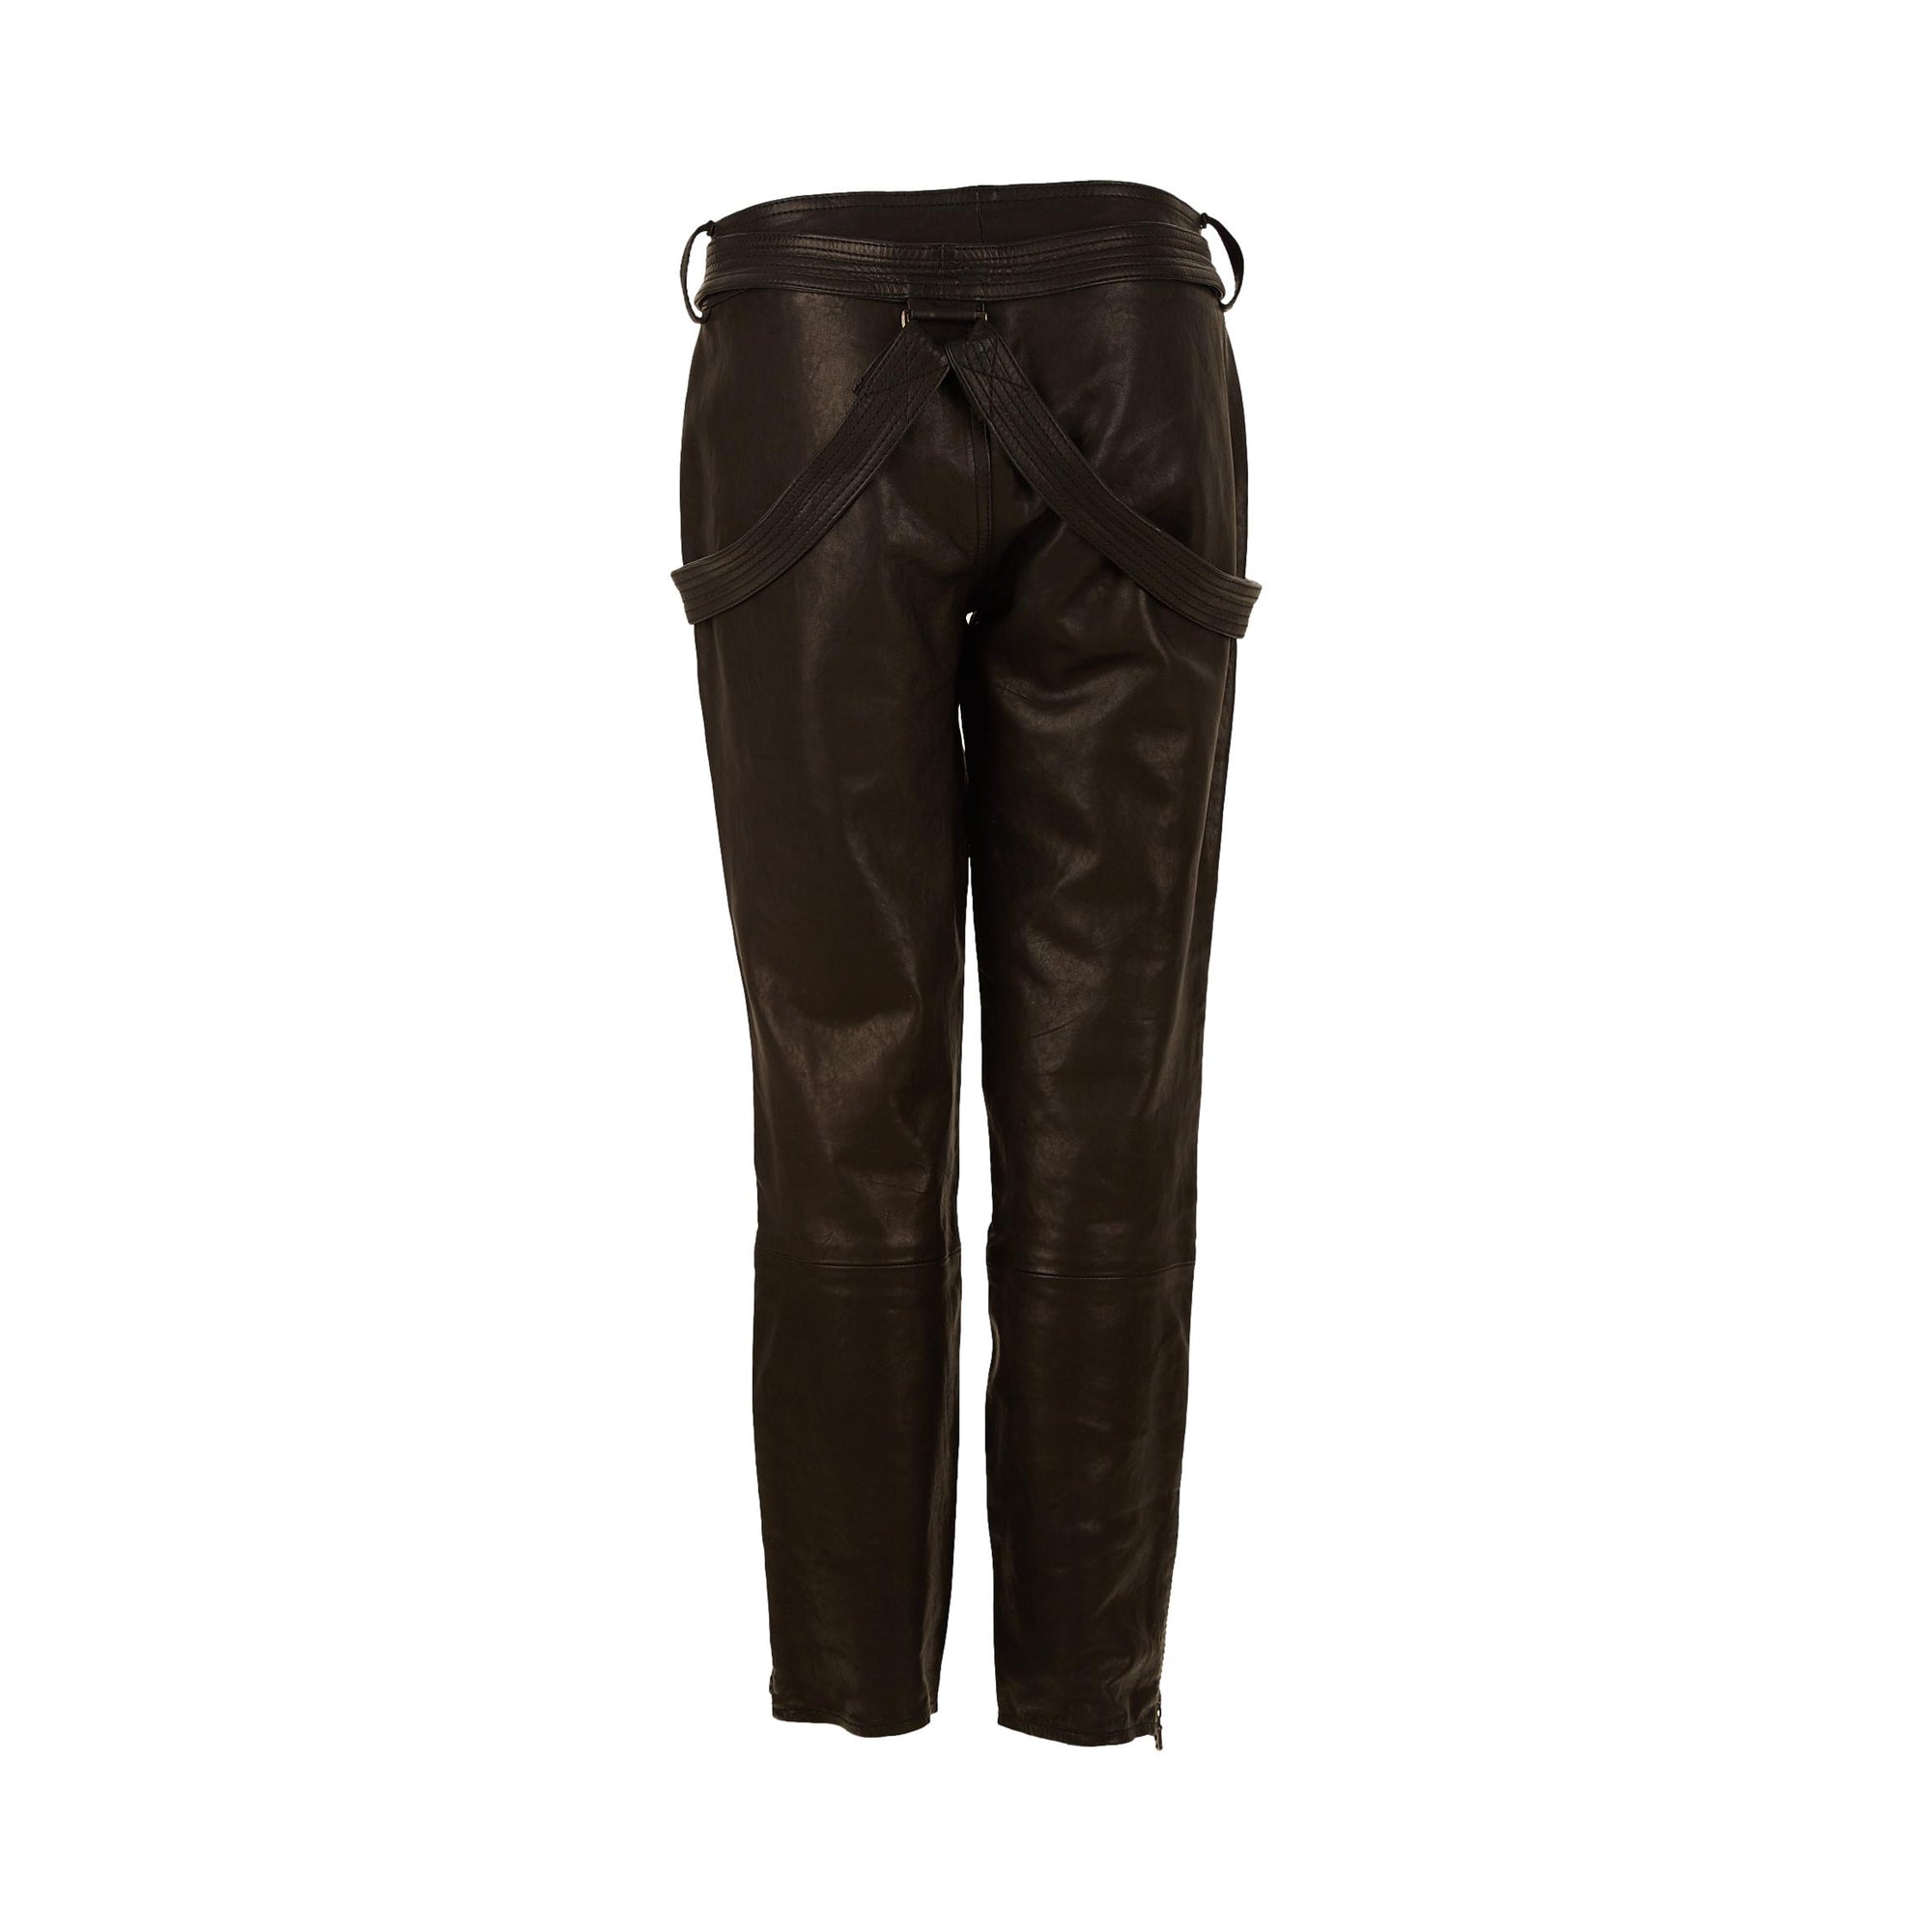 Galliano Black Leather Belted Pants